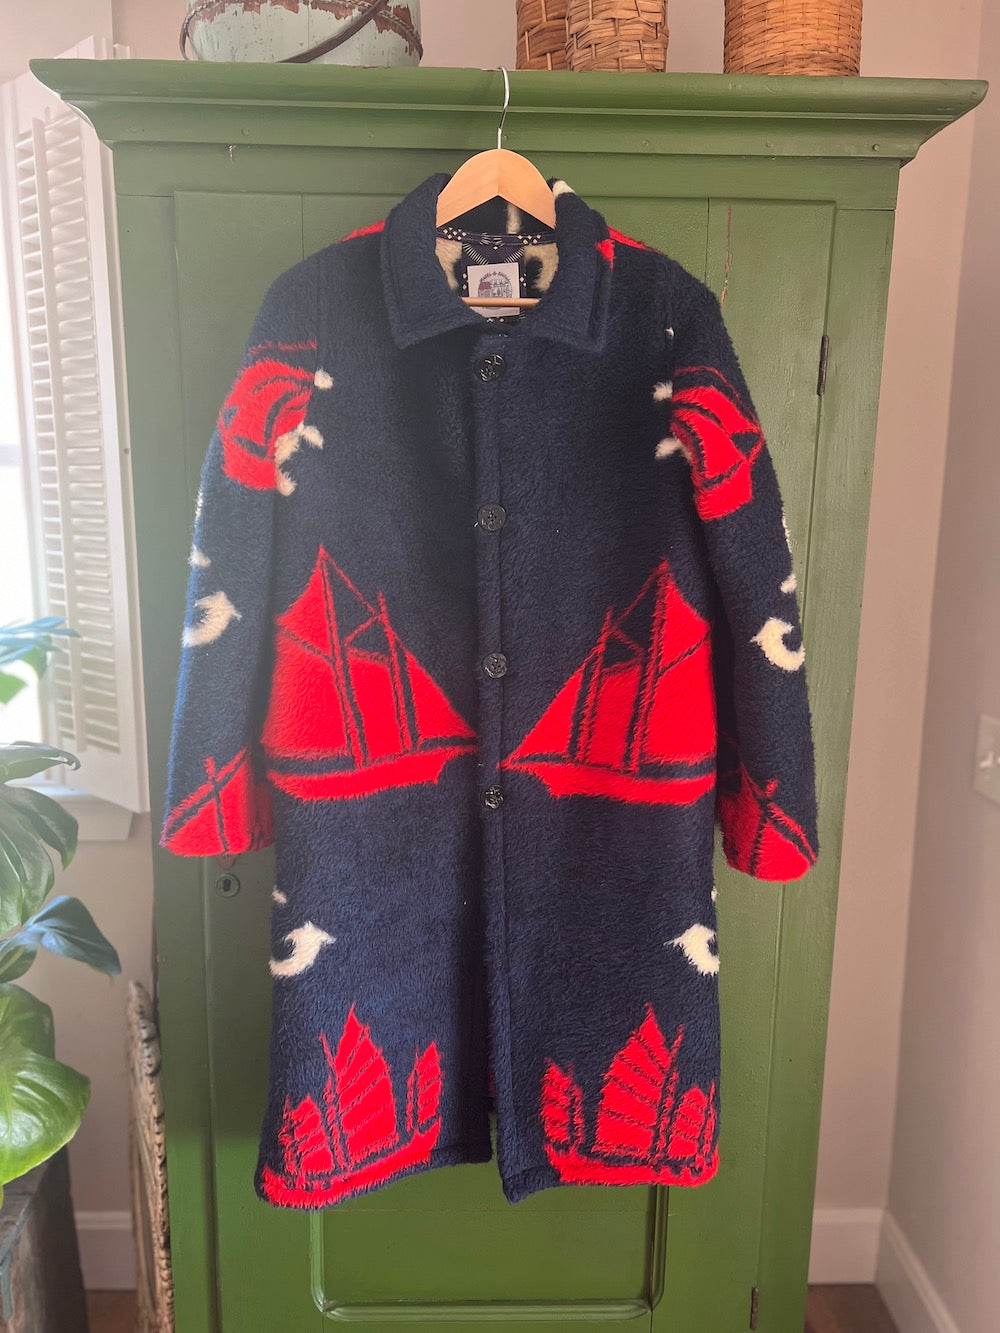 Nautical Blanket Coat With Removable Collar